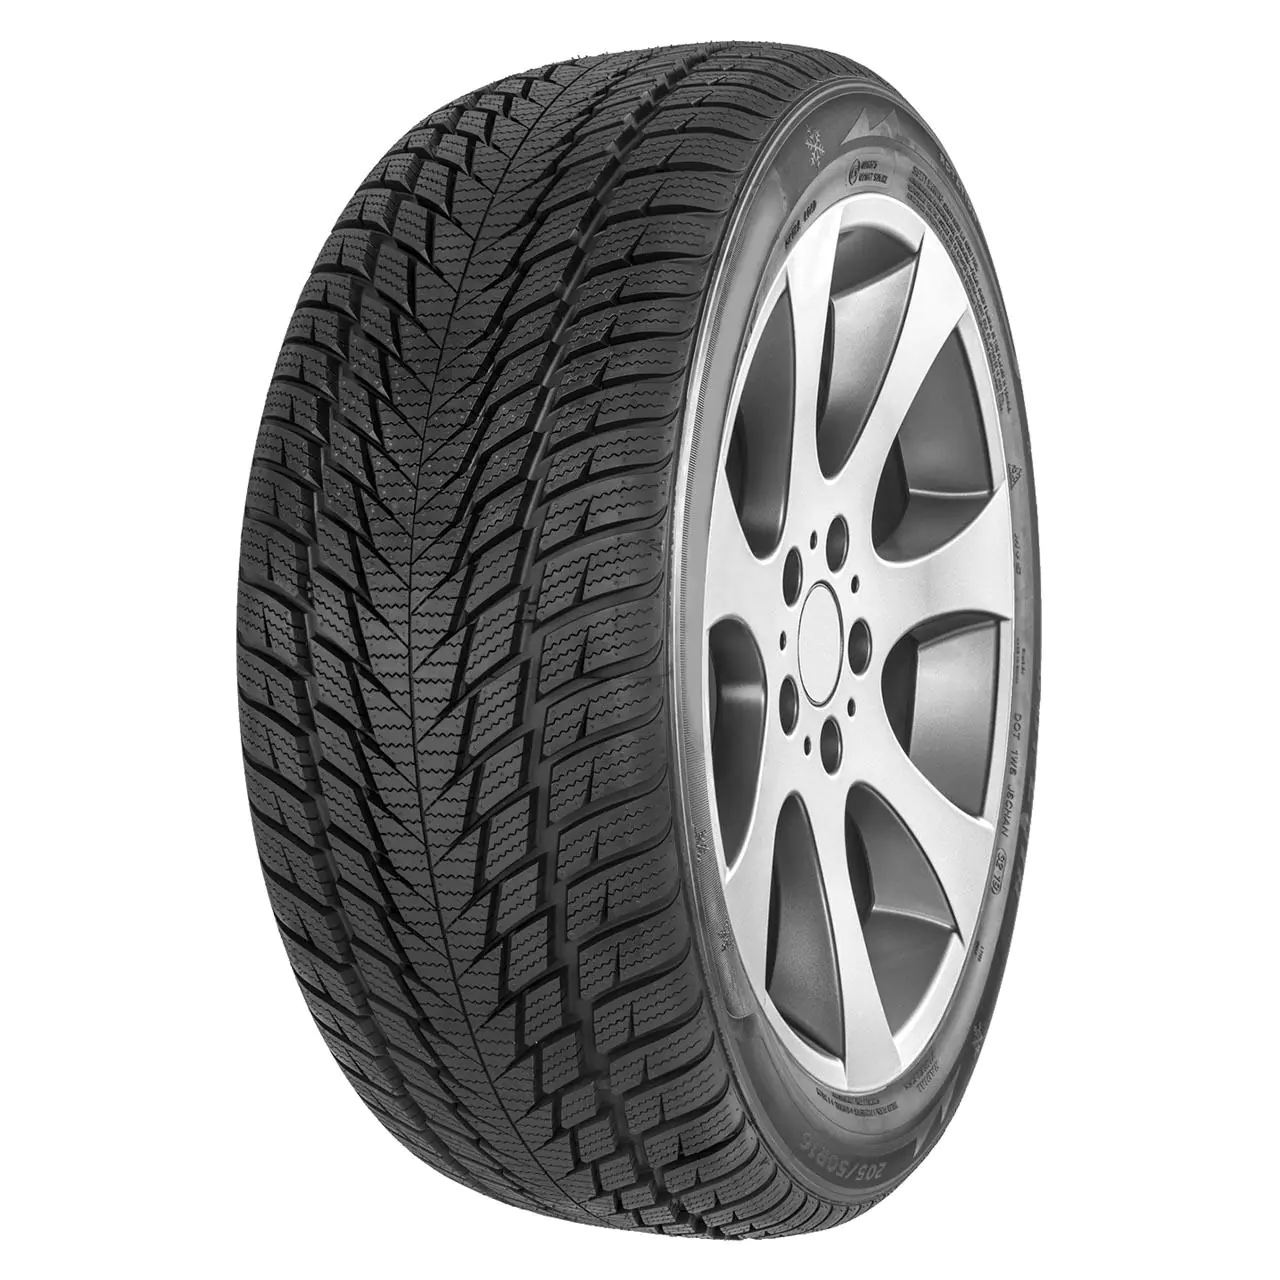 Gomme 4x4 Suv Fortuna 245/50 R19 105V GOWIN UHP3 XL M+S Invernale